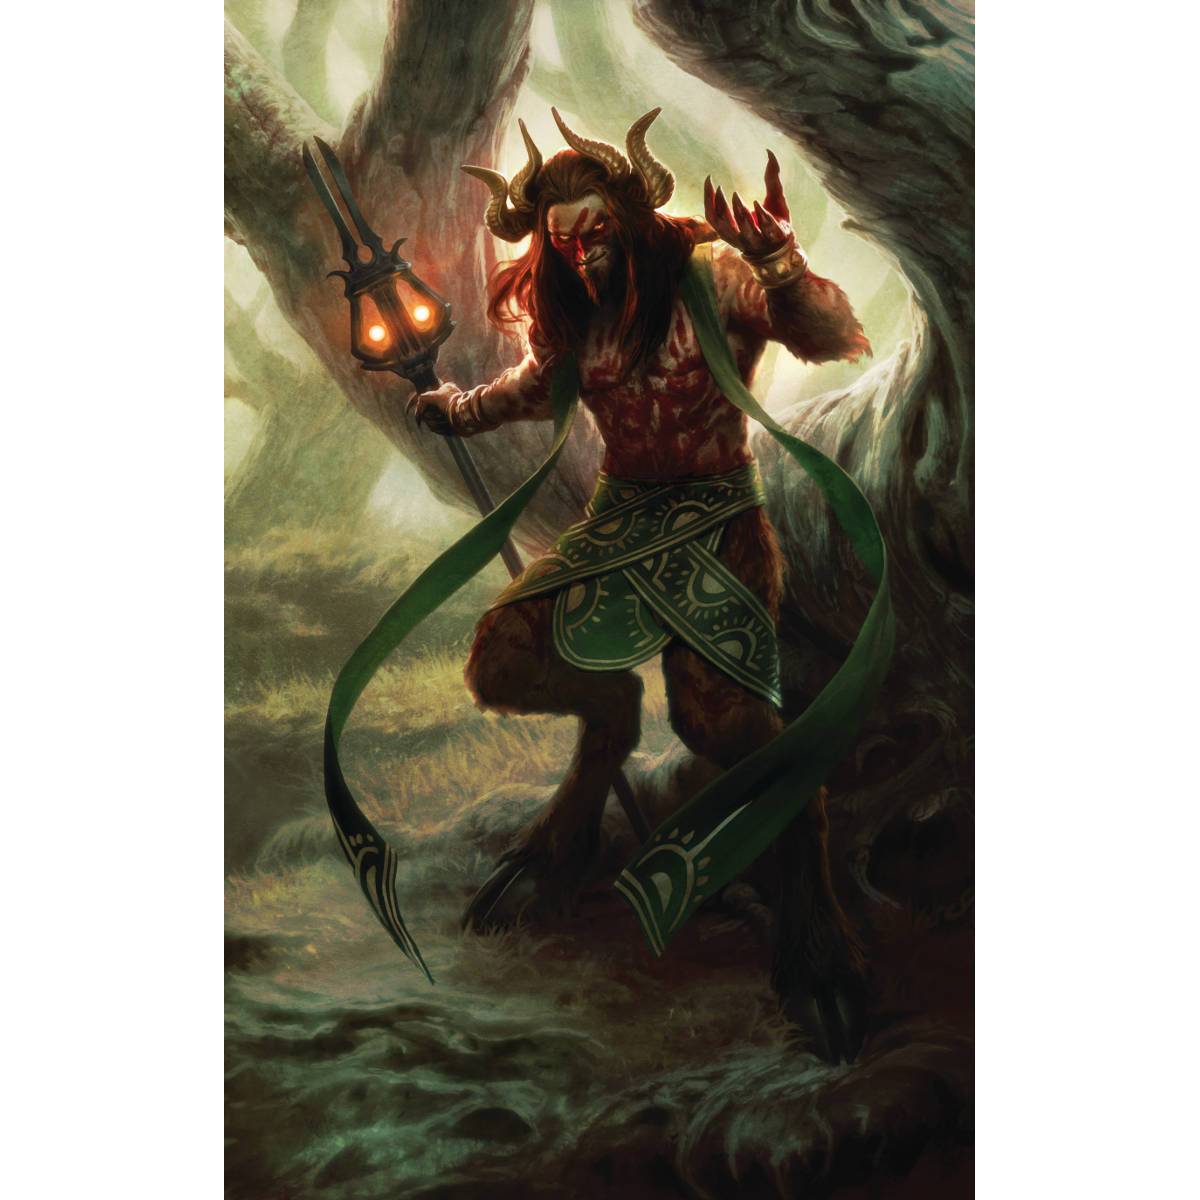 Xenagos, the Reveler Print - Print - Original Magic Art - Accessories for Magic the Gathering and other card games